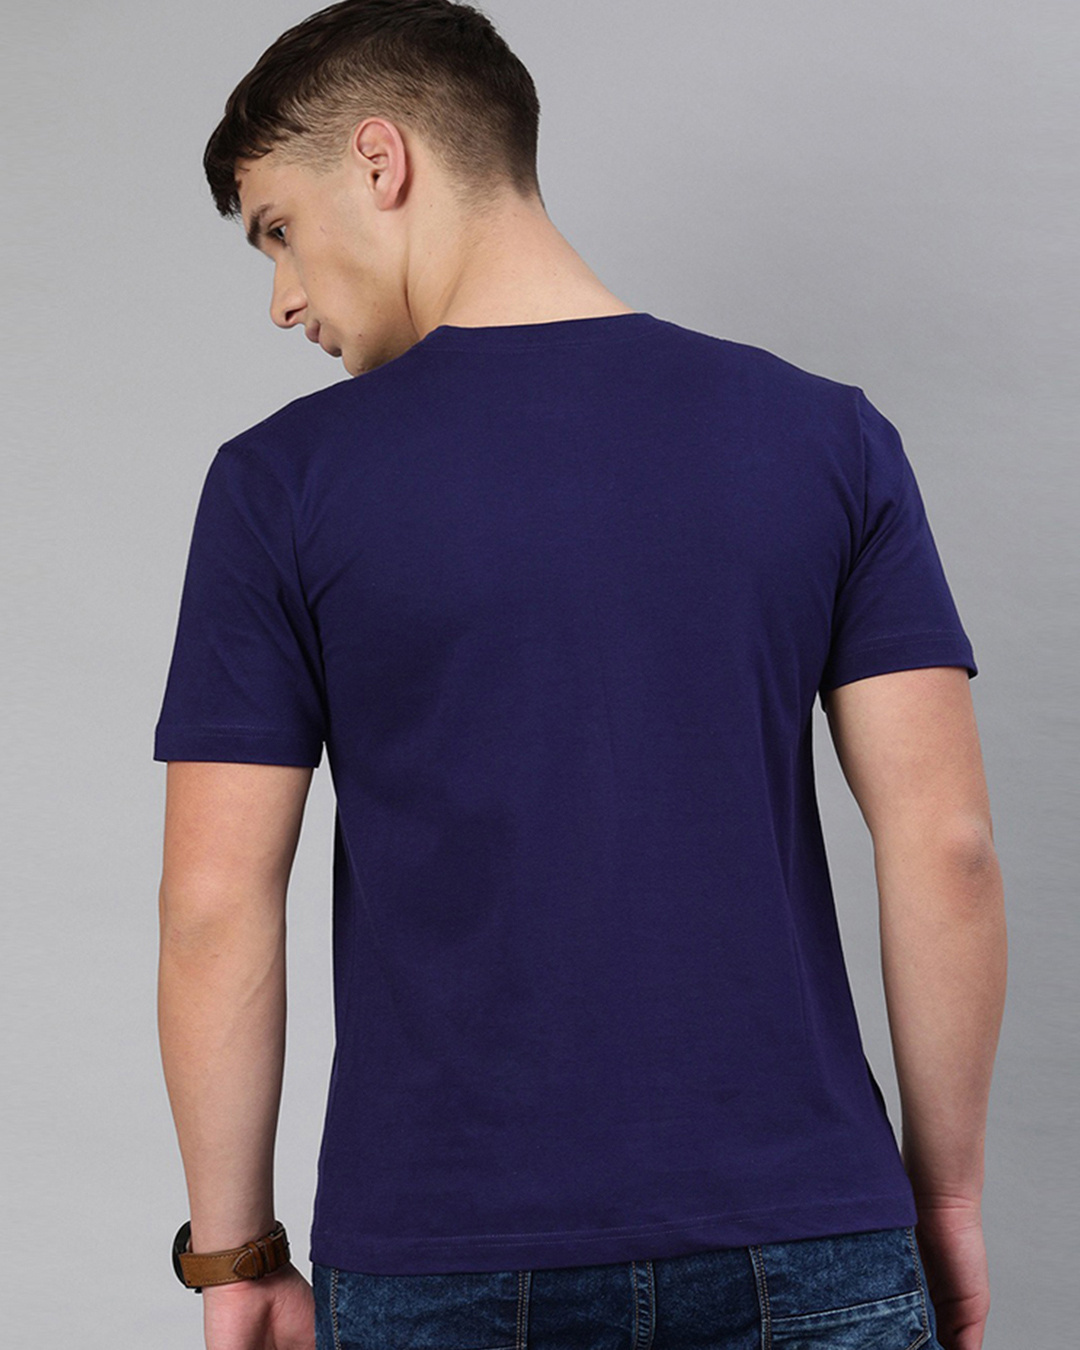 Shop Vacay All Day Half Sleeve T Shirt For Men-Back